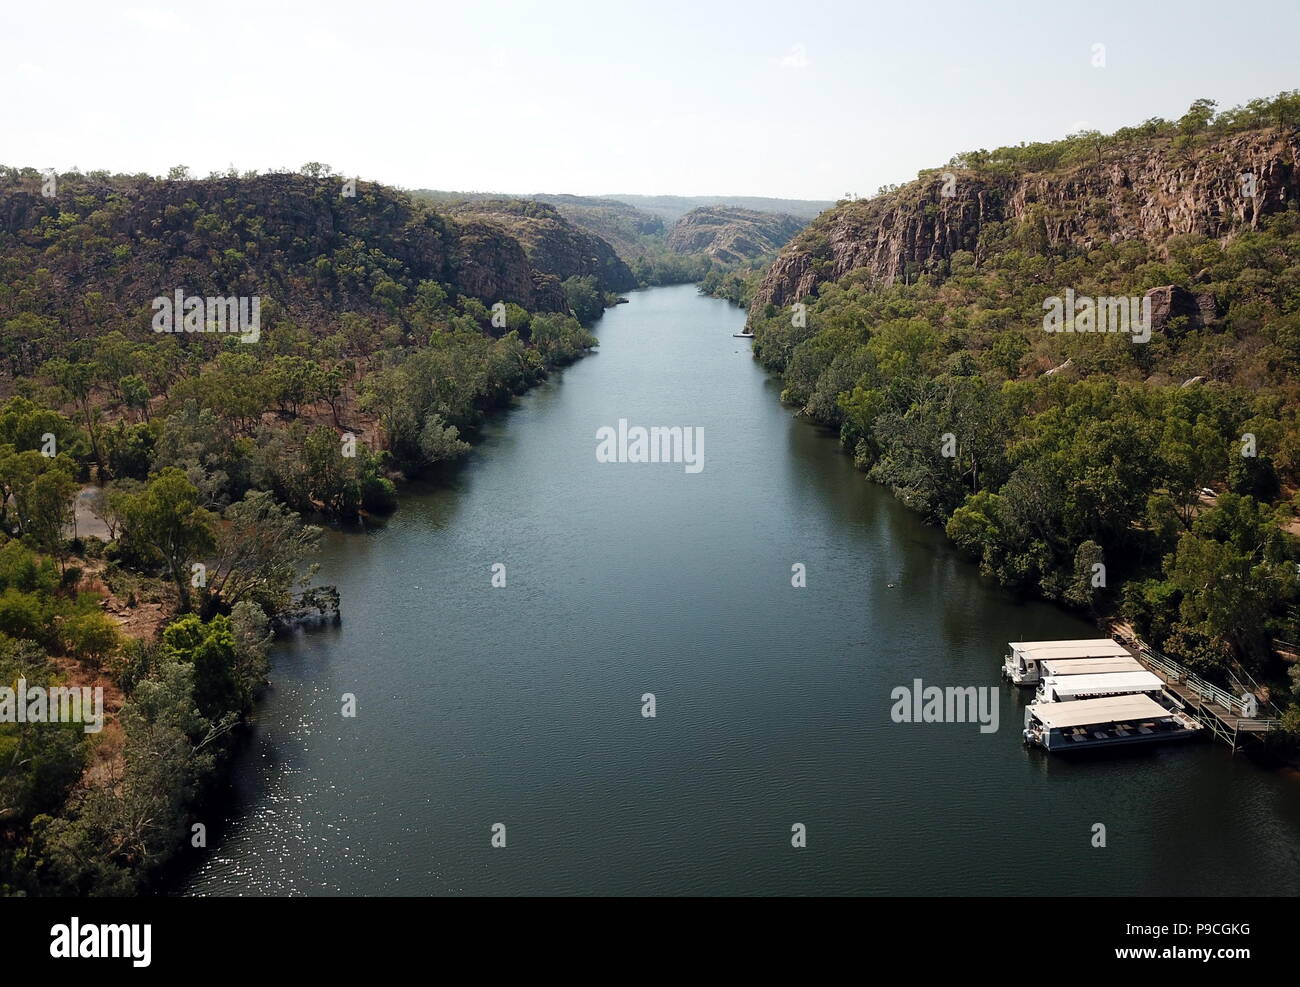 Panoramic view over Katherine river and Katherine Gorge in Nitmiluk National Park, Northern Territory of Australia Stock Photo